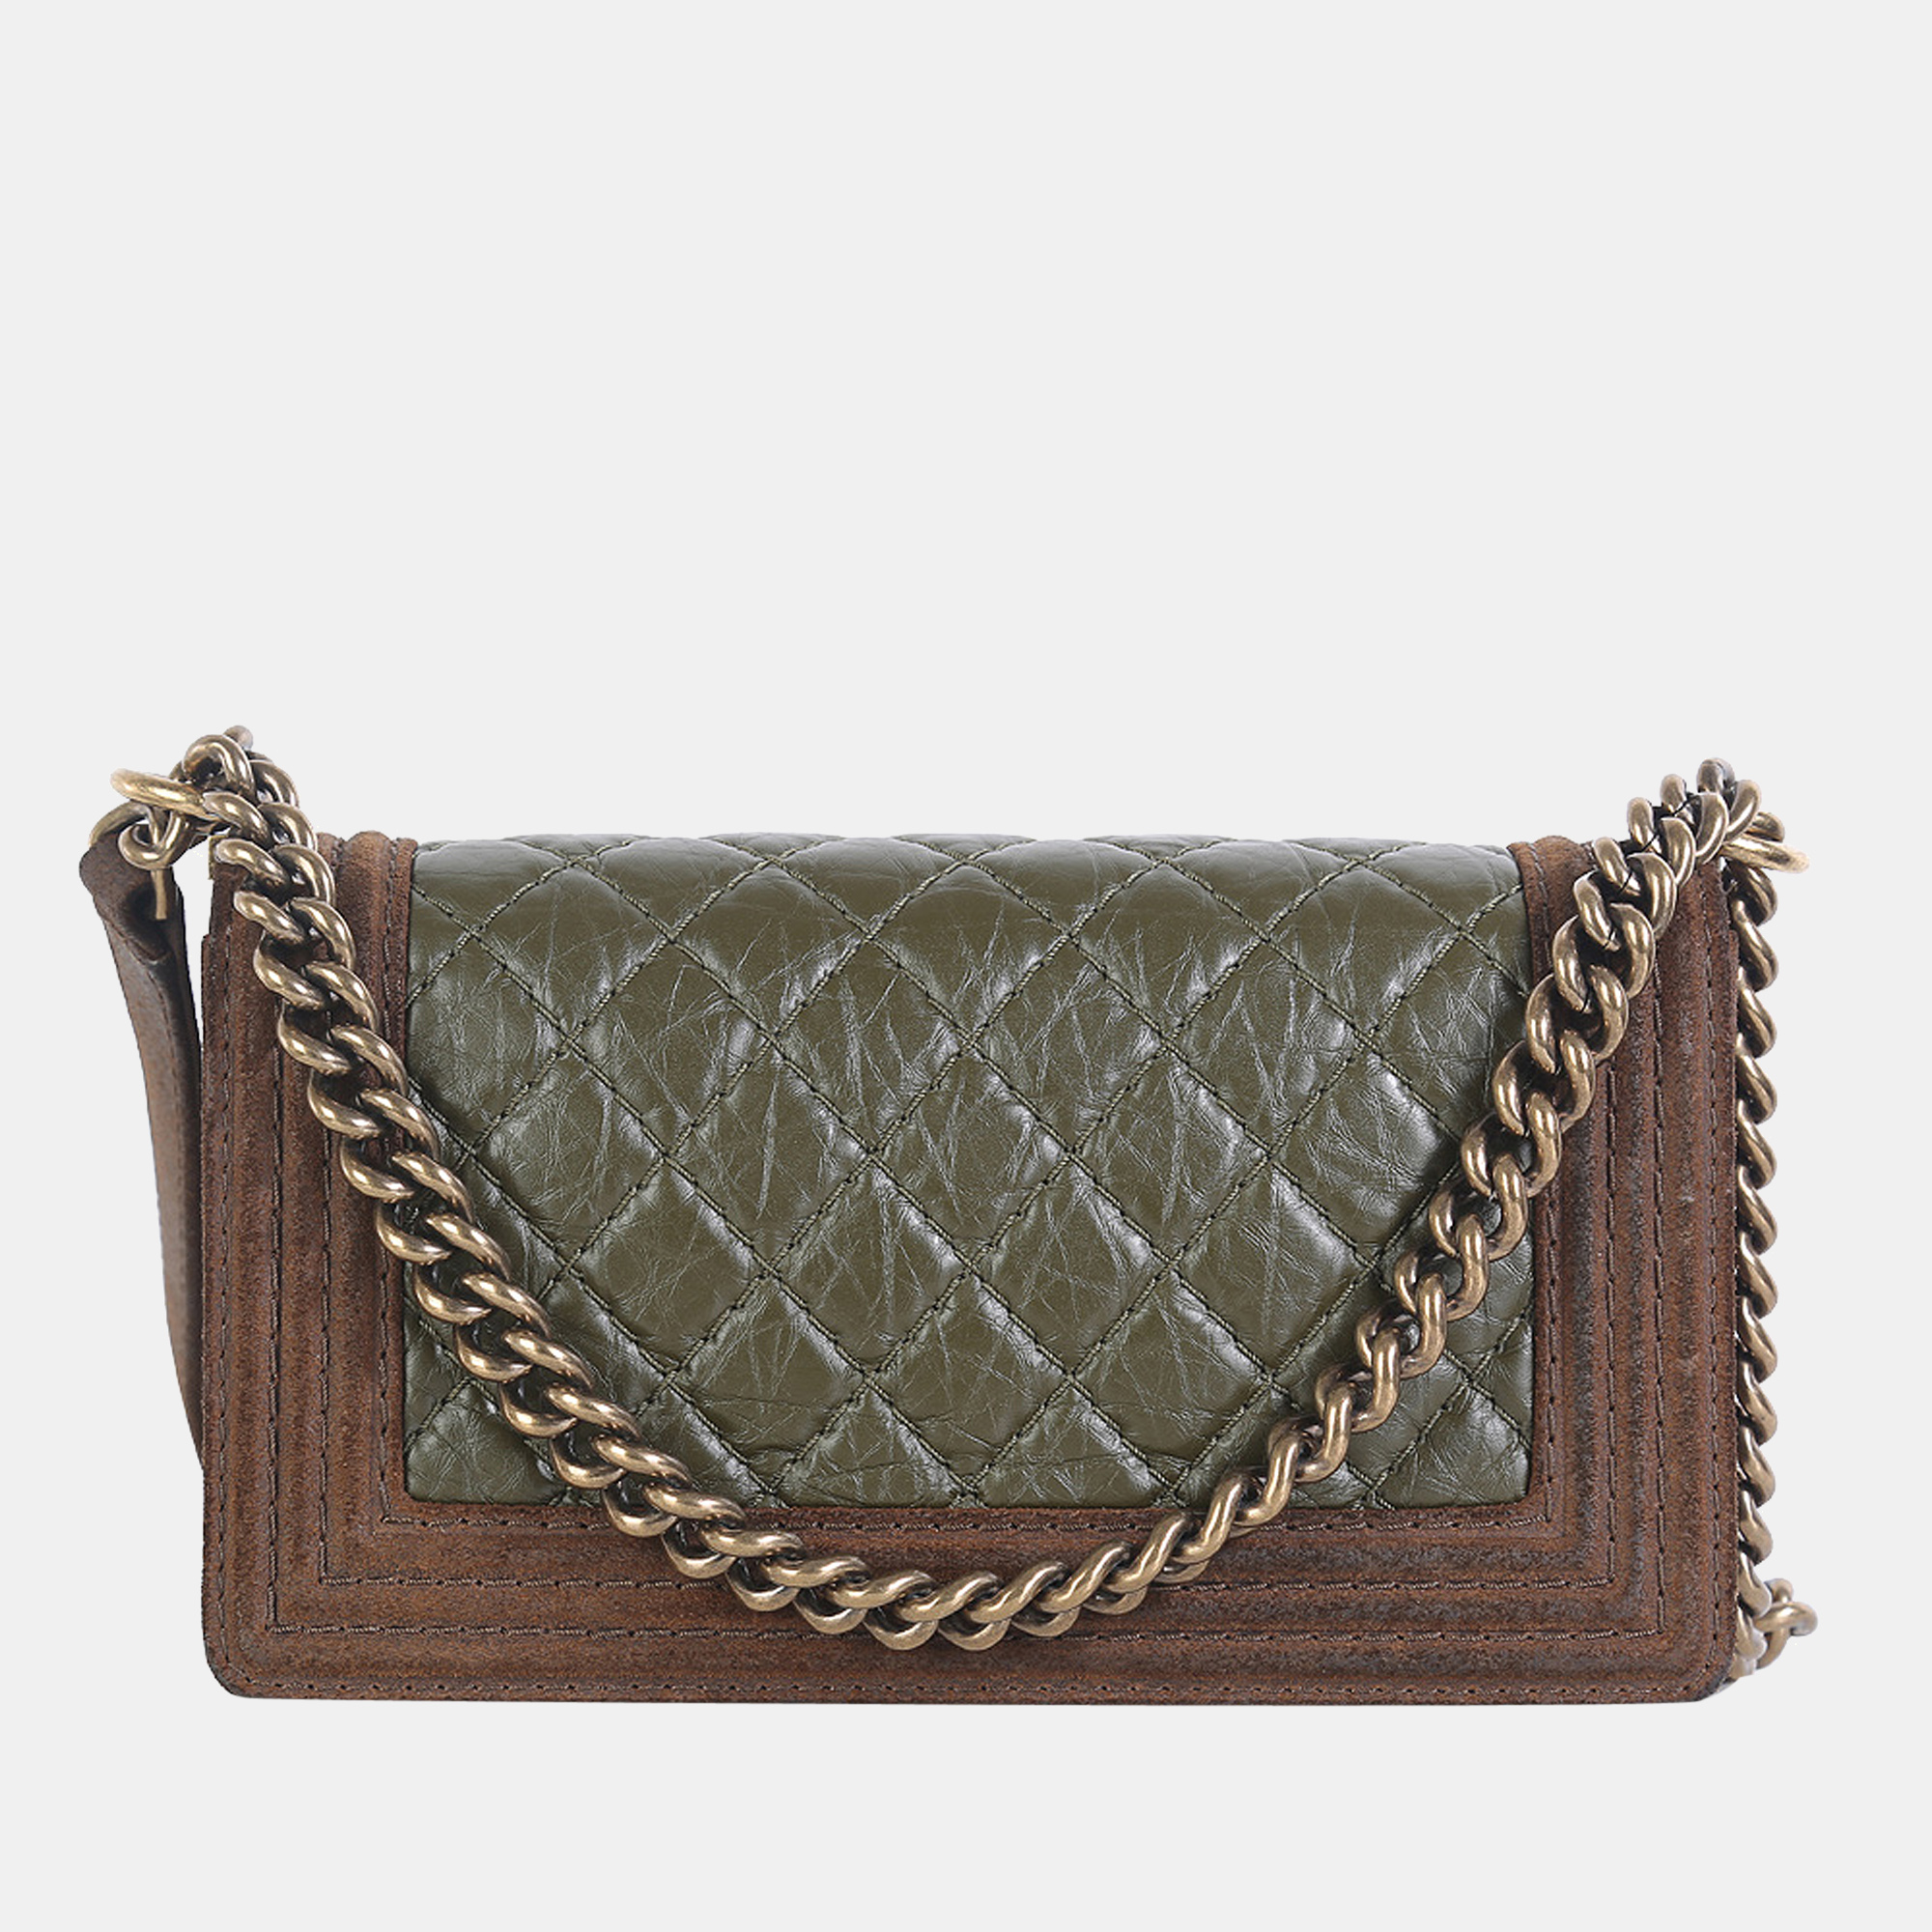 Chanel Olive Green/Brown Suede And Quilted Leather Medium Boy Shoulder Bag